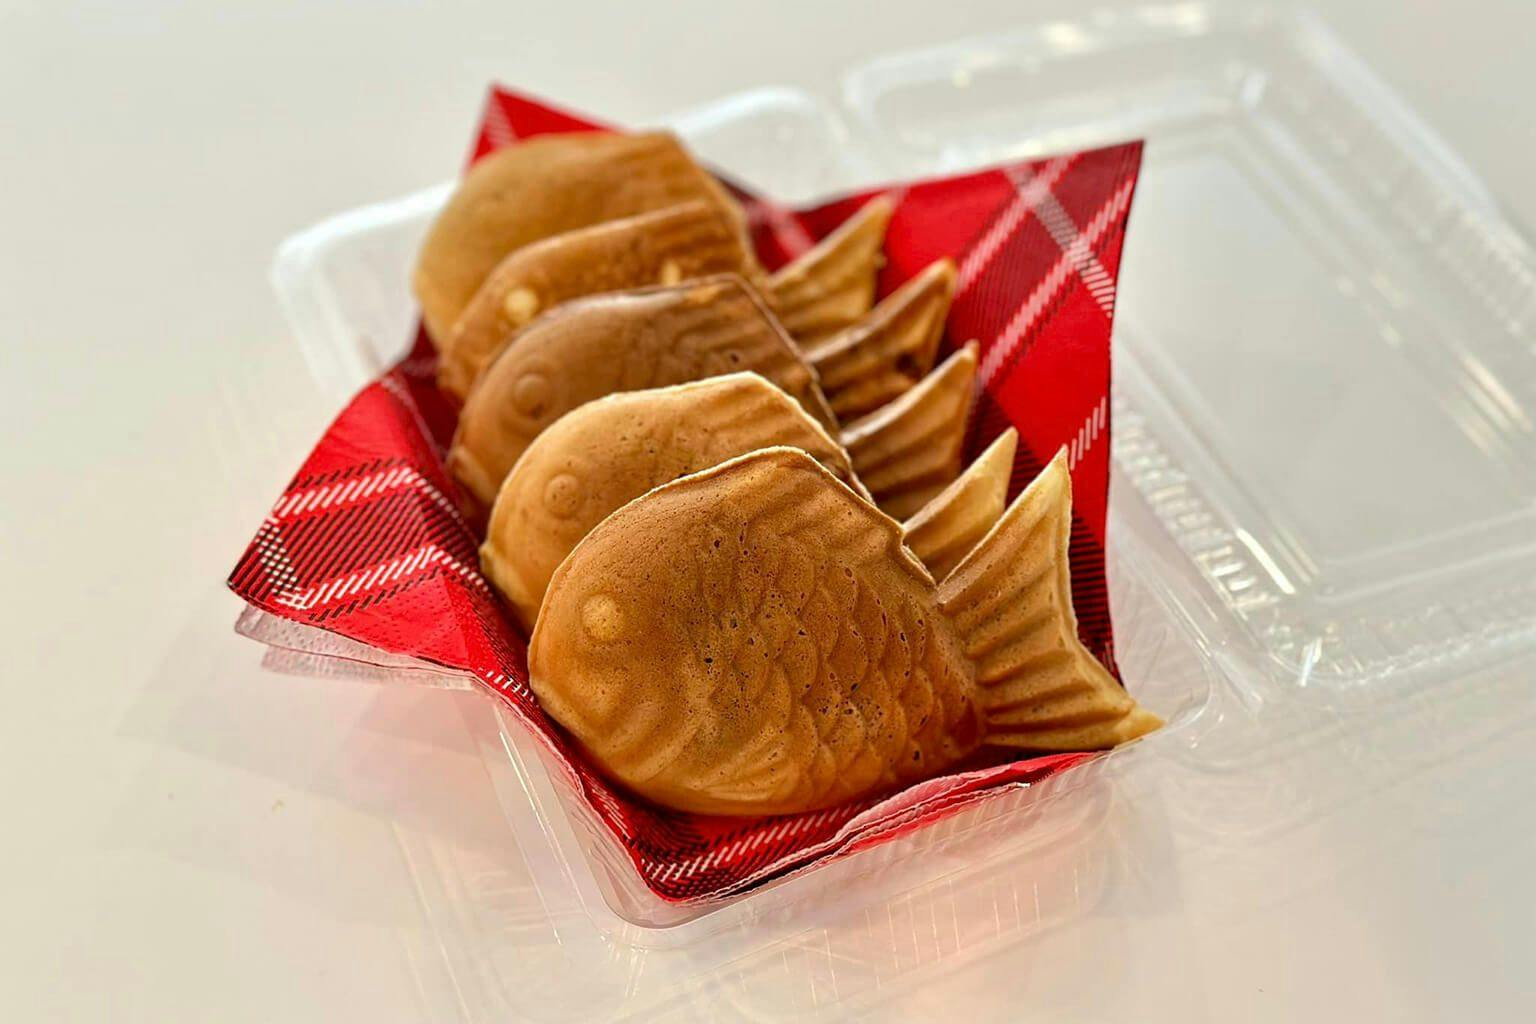 Taiyaki is great for gift-giving!